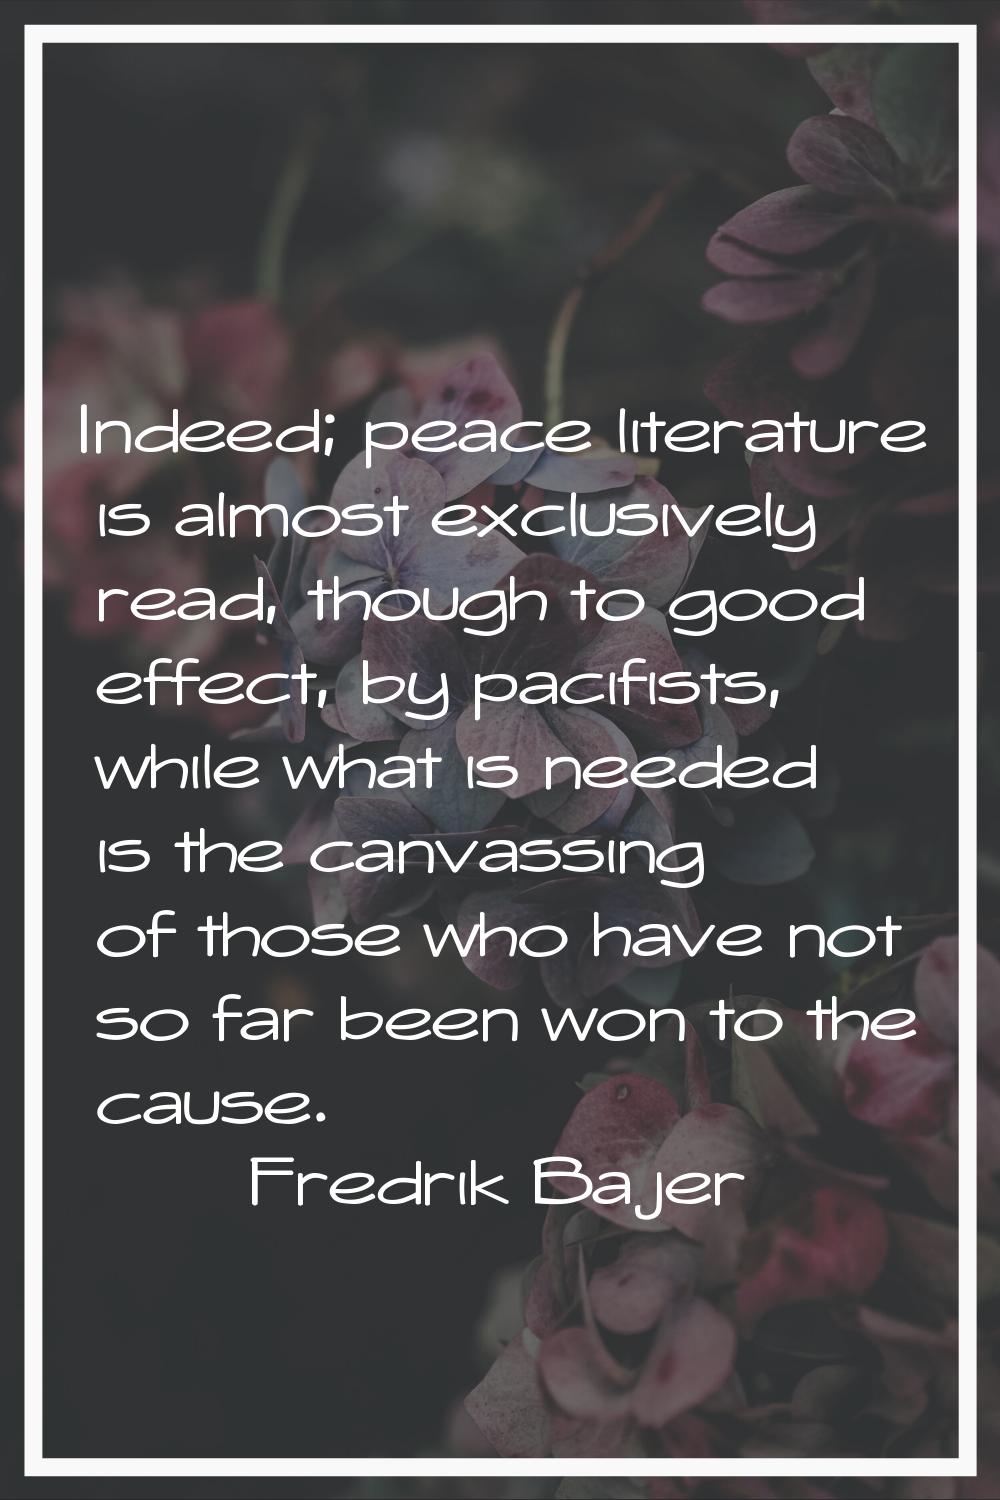 Indeed; peace literature is almost exclusively read, though to good effect, by pacifists, while wha